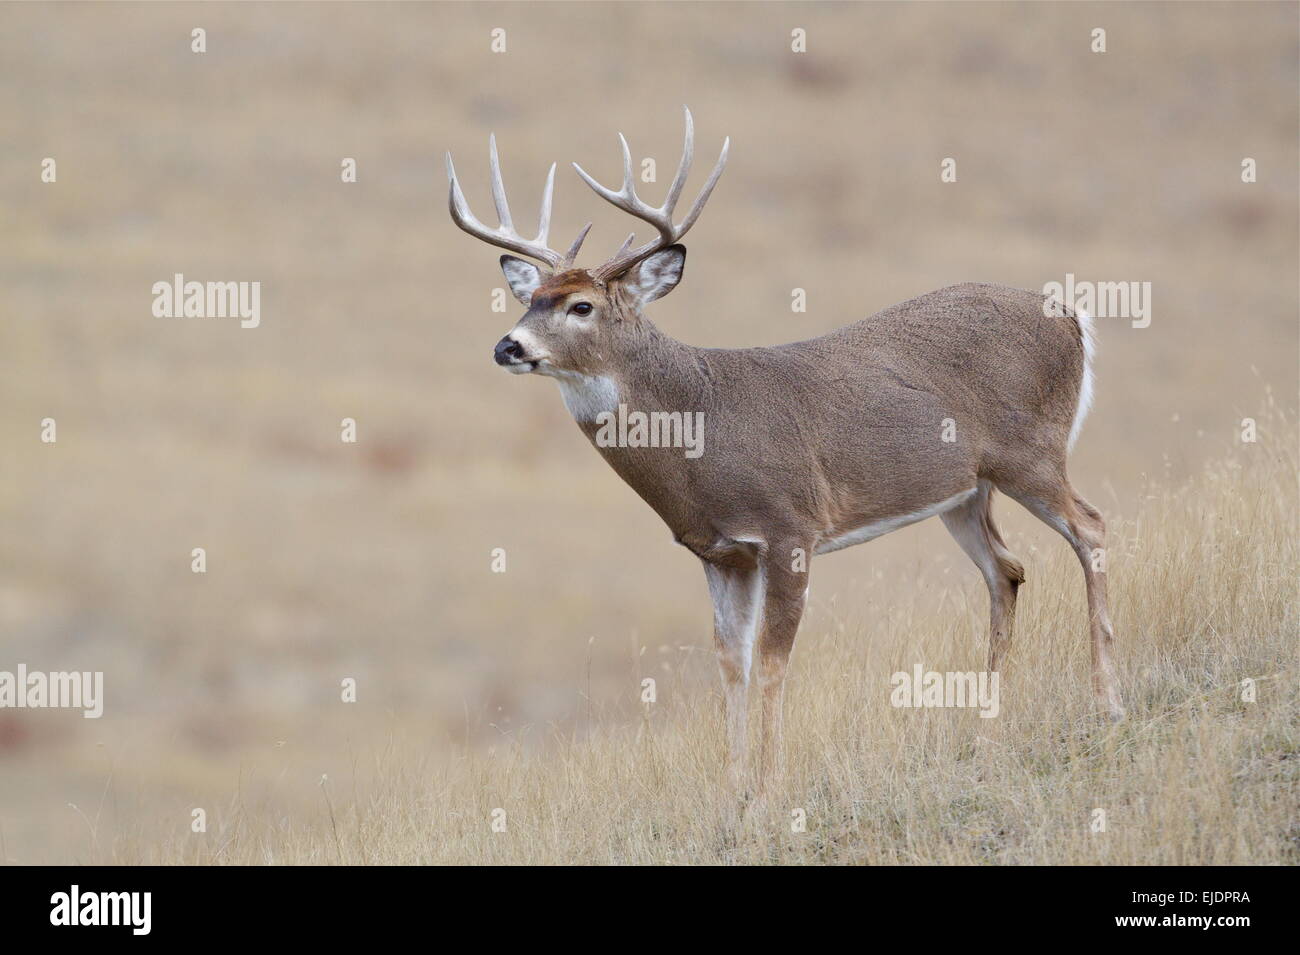 Whitetail buck deer stag with 10 point antlers  Midwestern big game midwest archery hunting season  Odocoileus virginianus Stock Photo